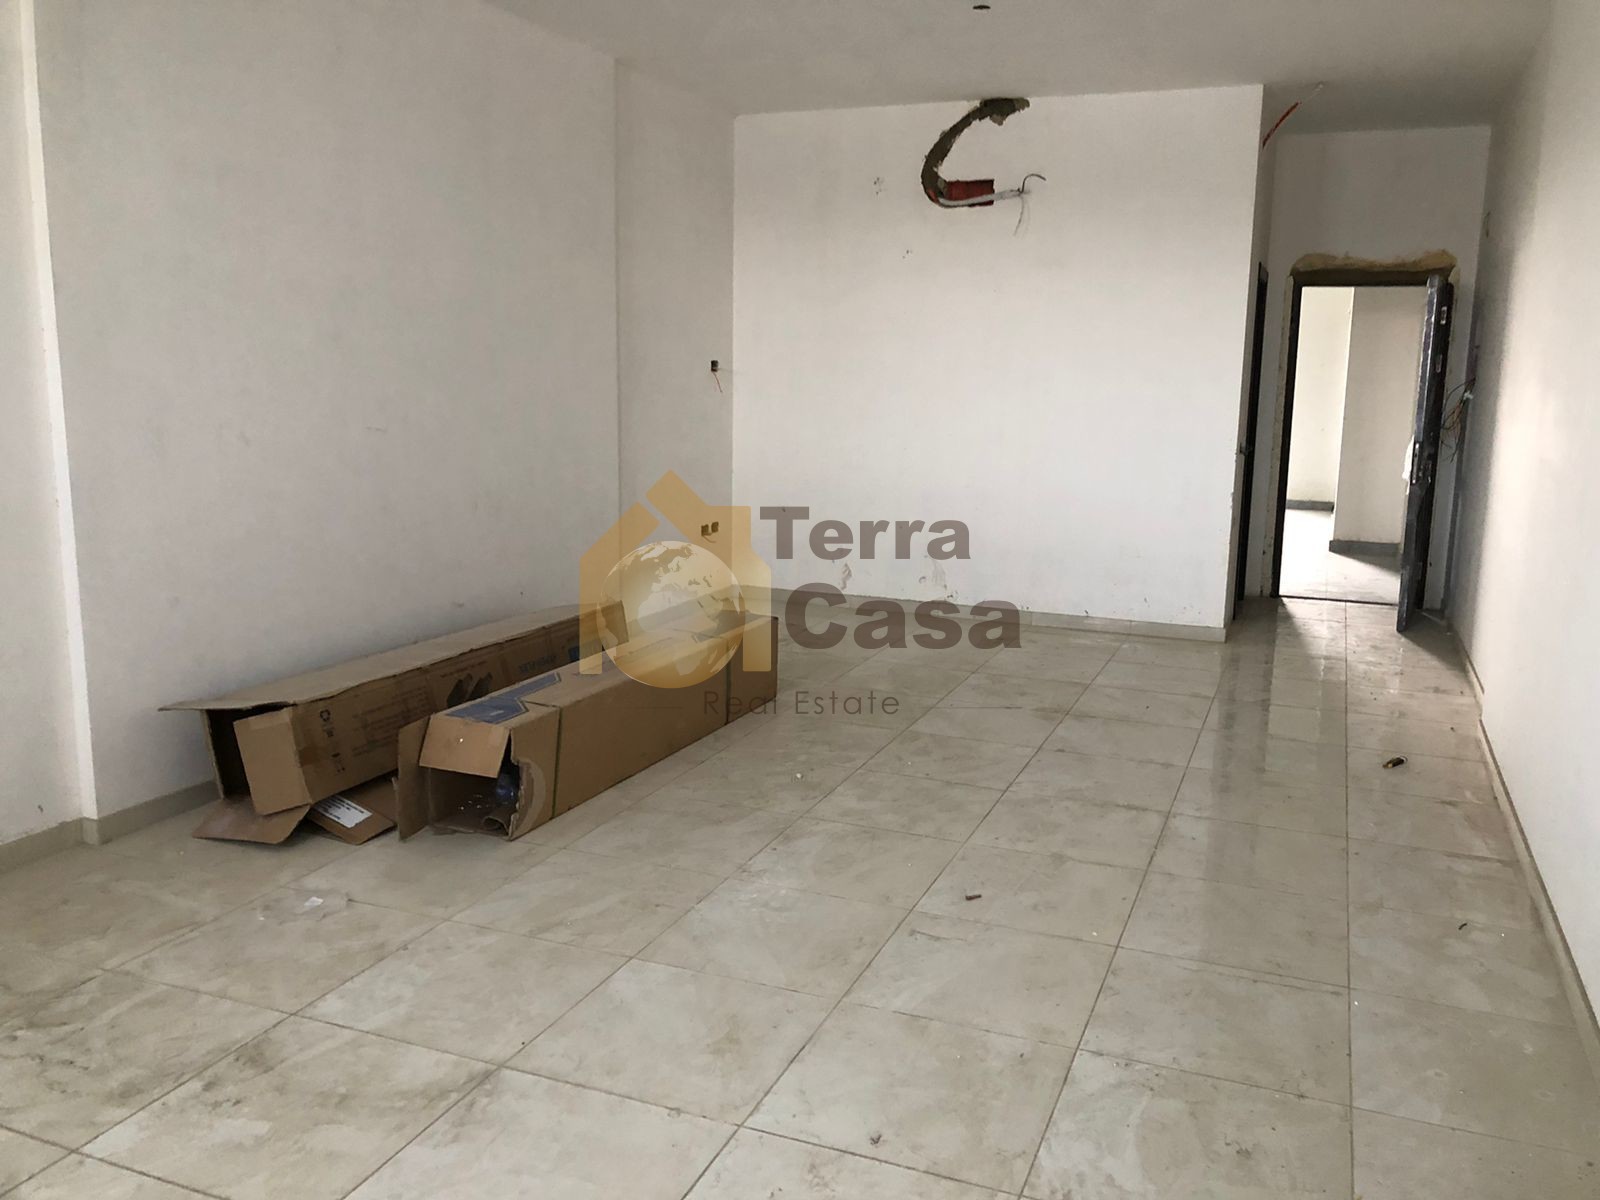 Office for sale in Zahle brand new in haouch el omara prime location for sale .